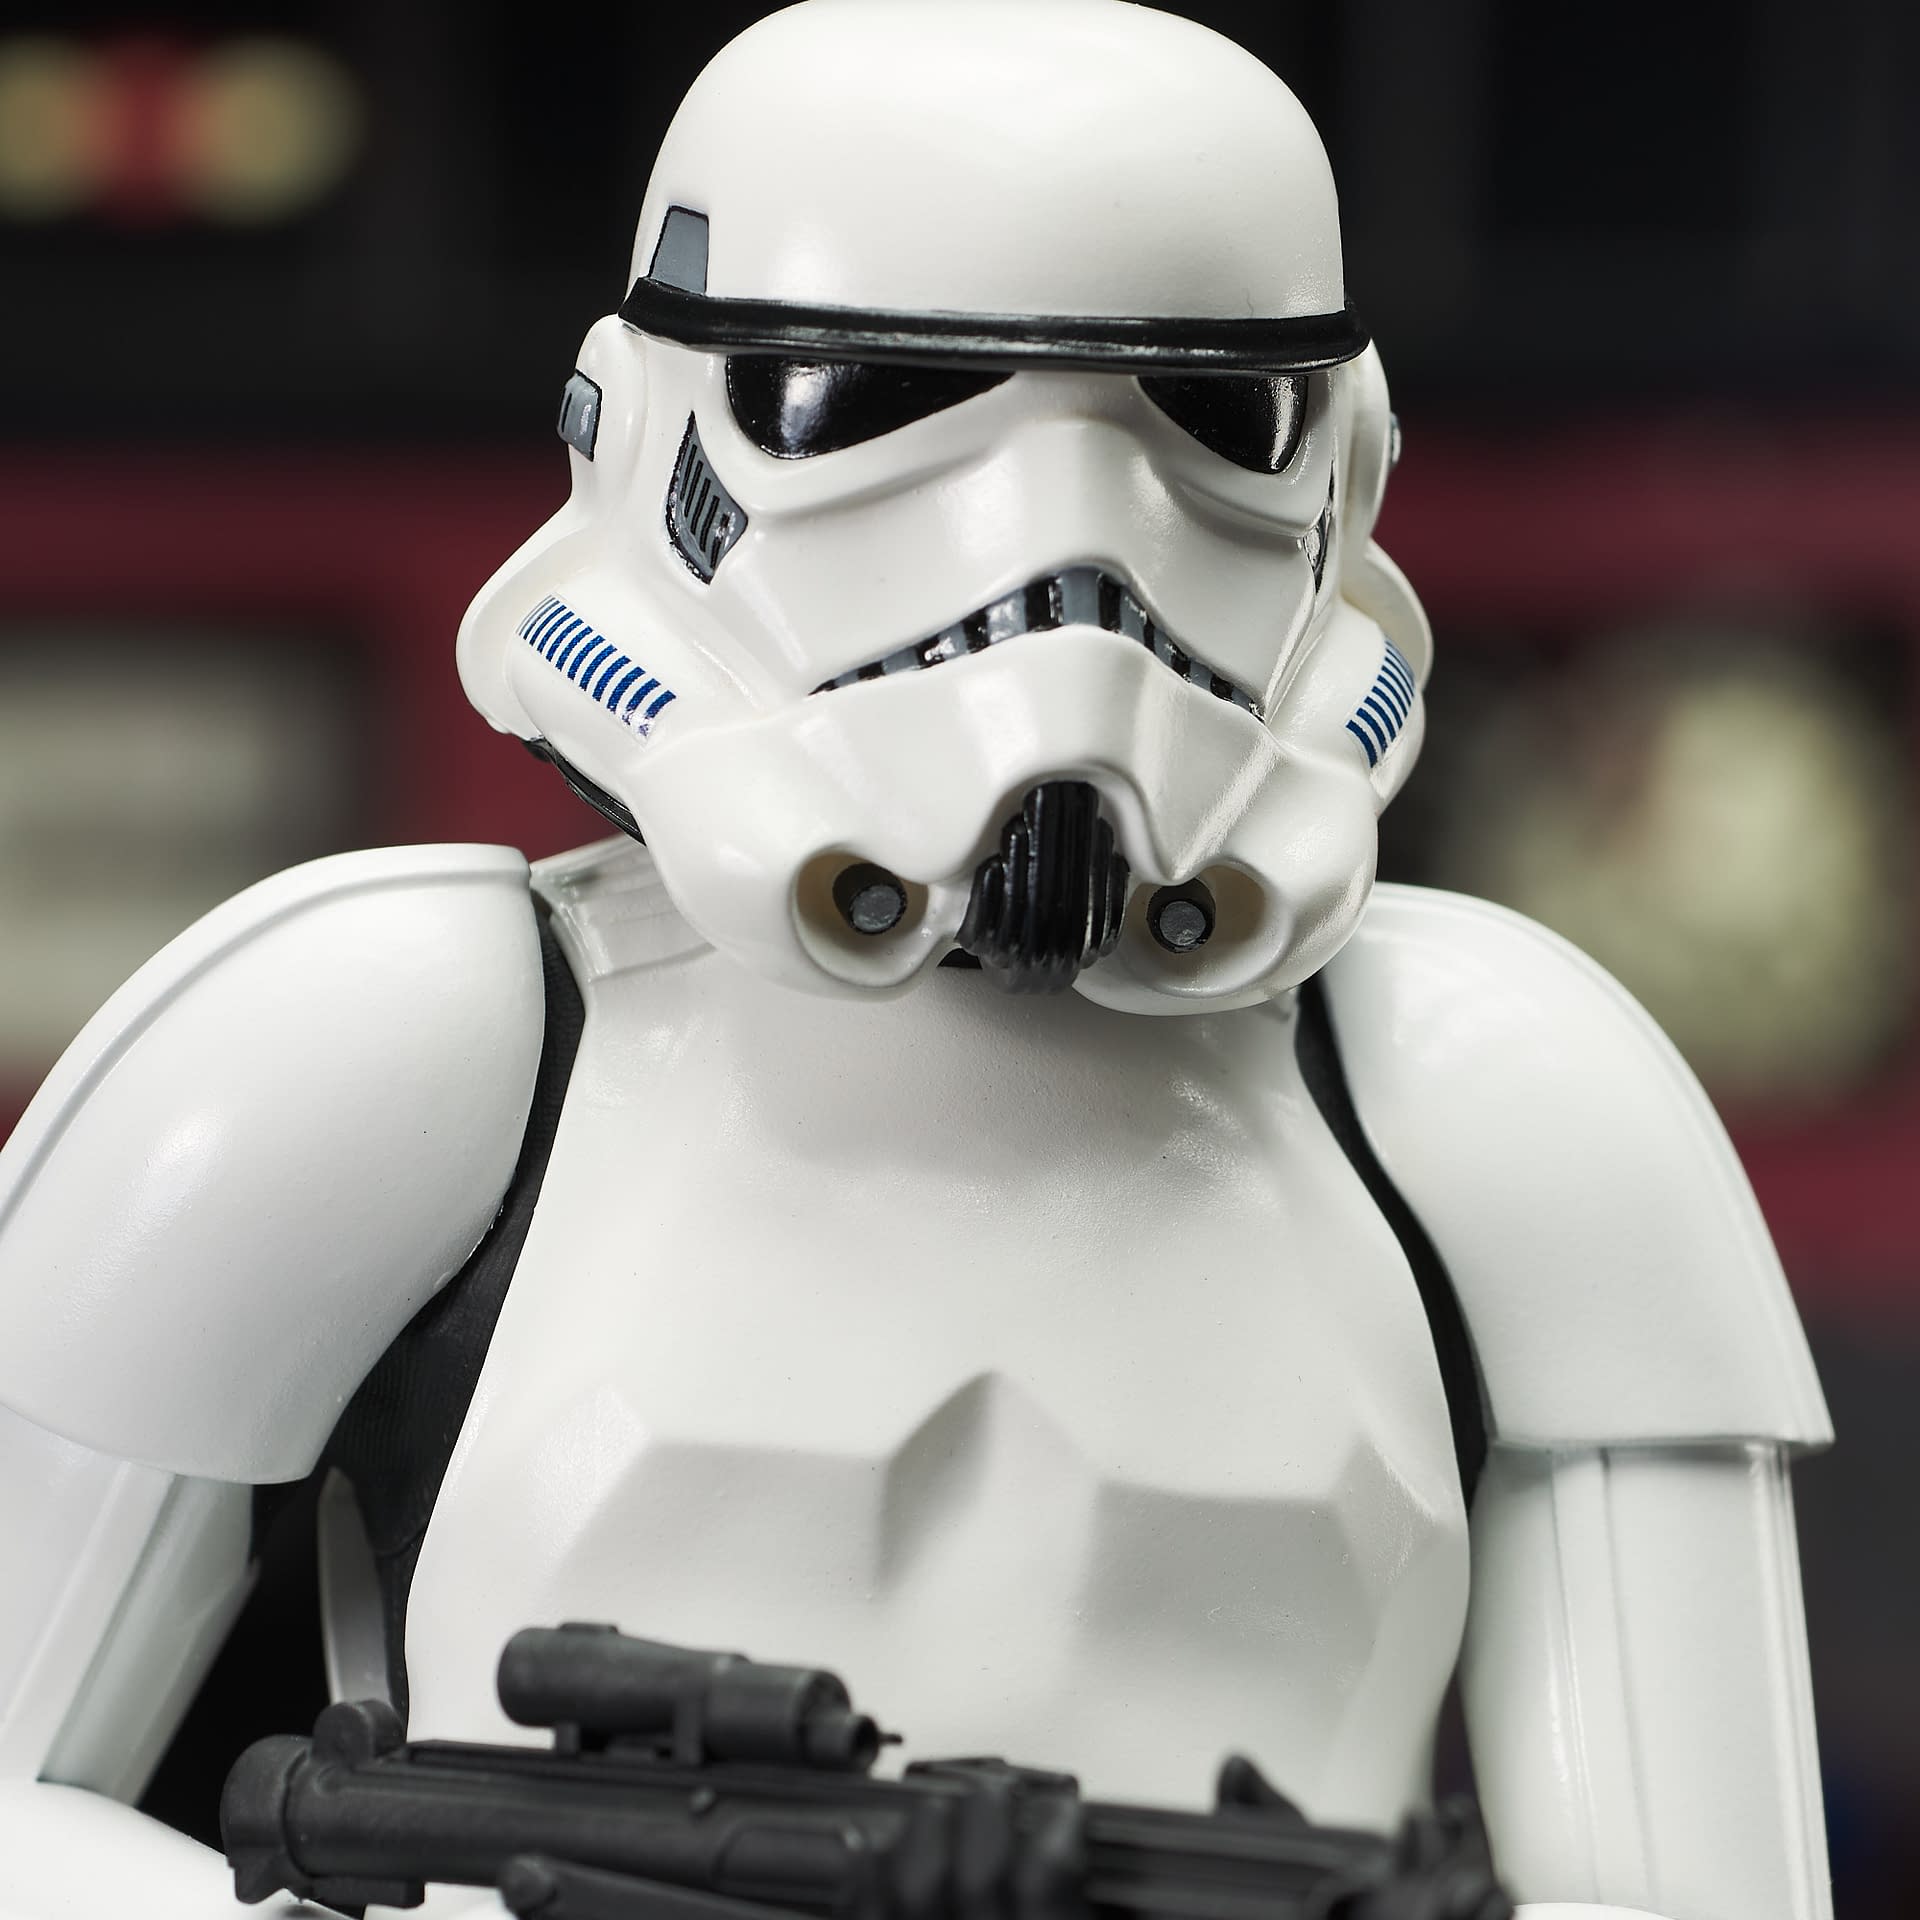 Star Wars Han Solo as Stormtrooper Statue Coming from Gentle Giant 